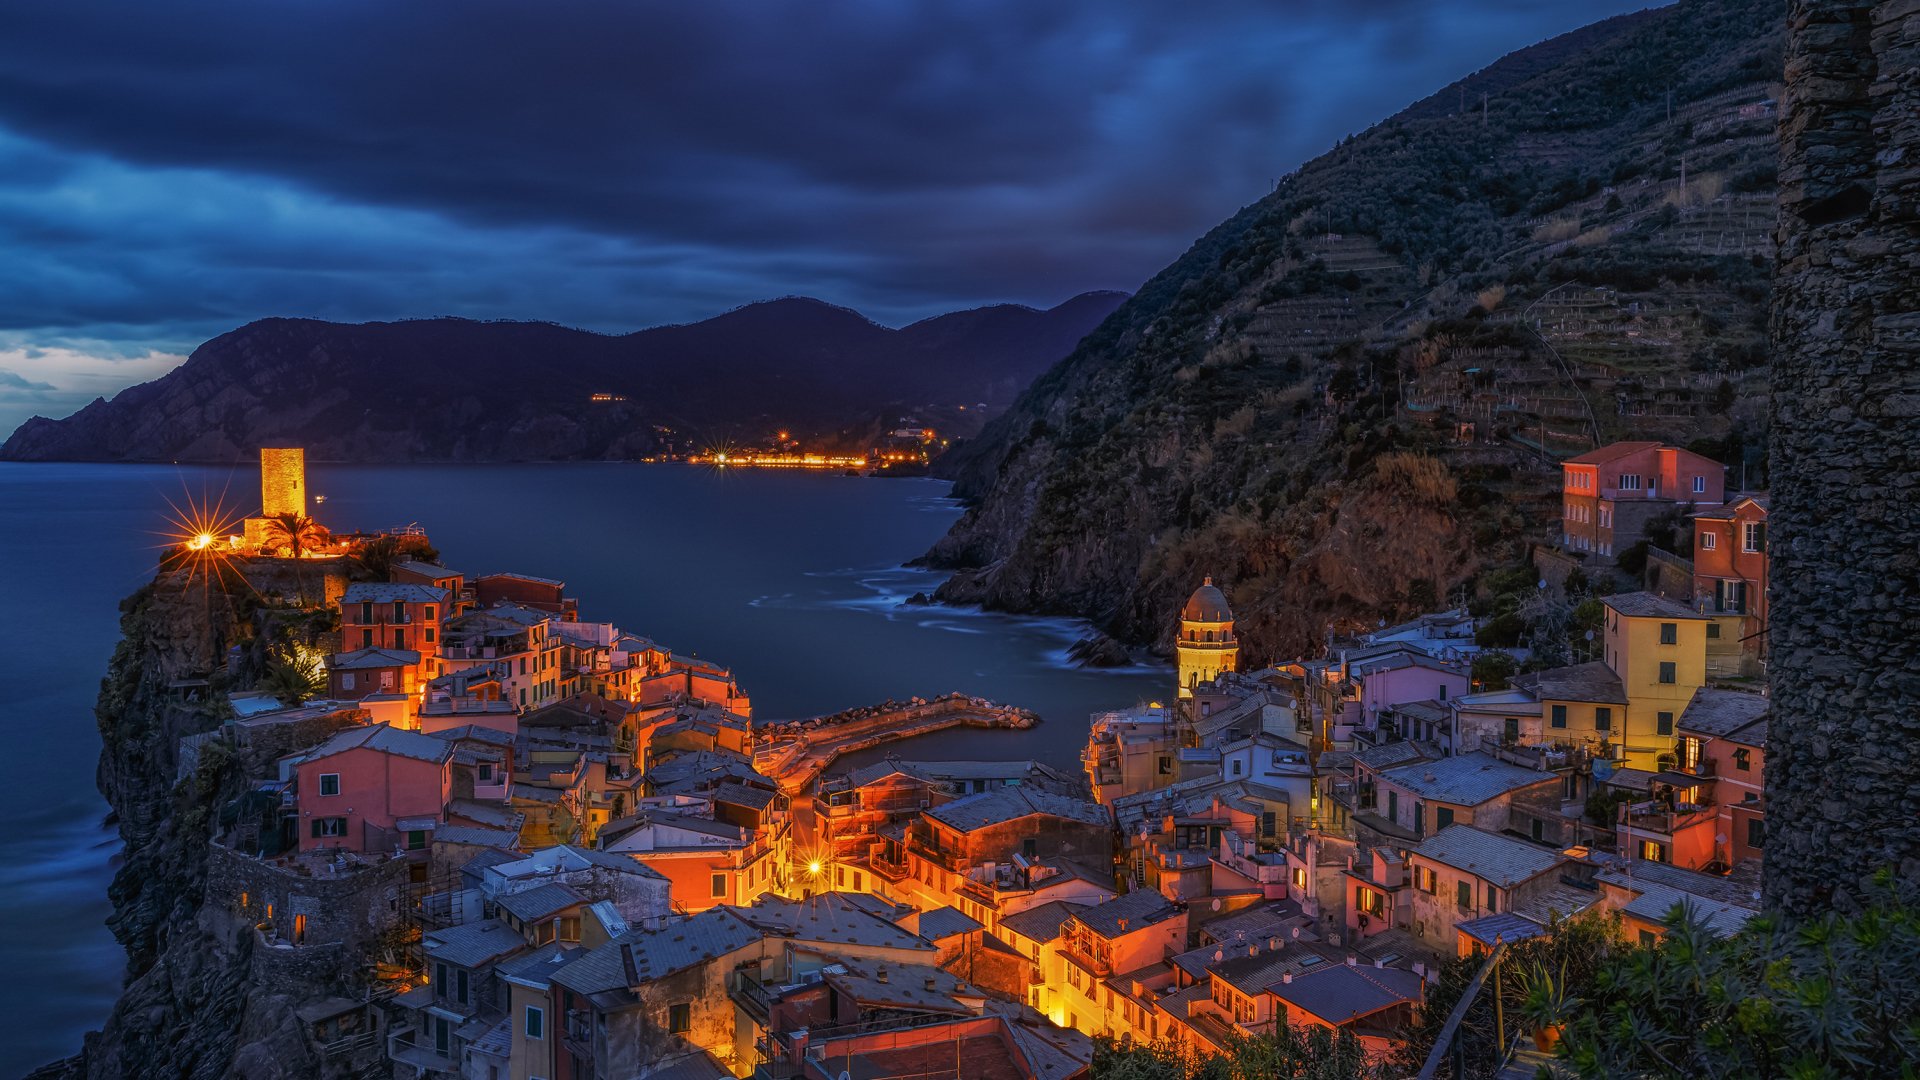 architecture, Building, Old building, Vernazza, Italy, Village, Cliff, Mountains, Sea, Clouds, Evening, Lights, House, Coast Wallpaper